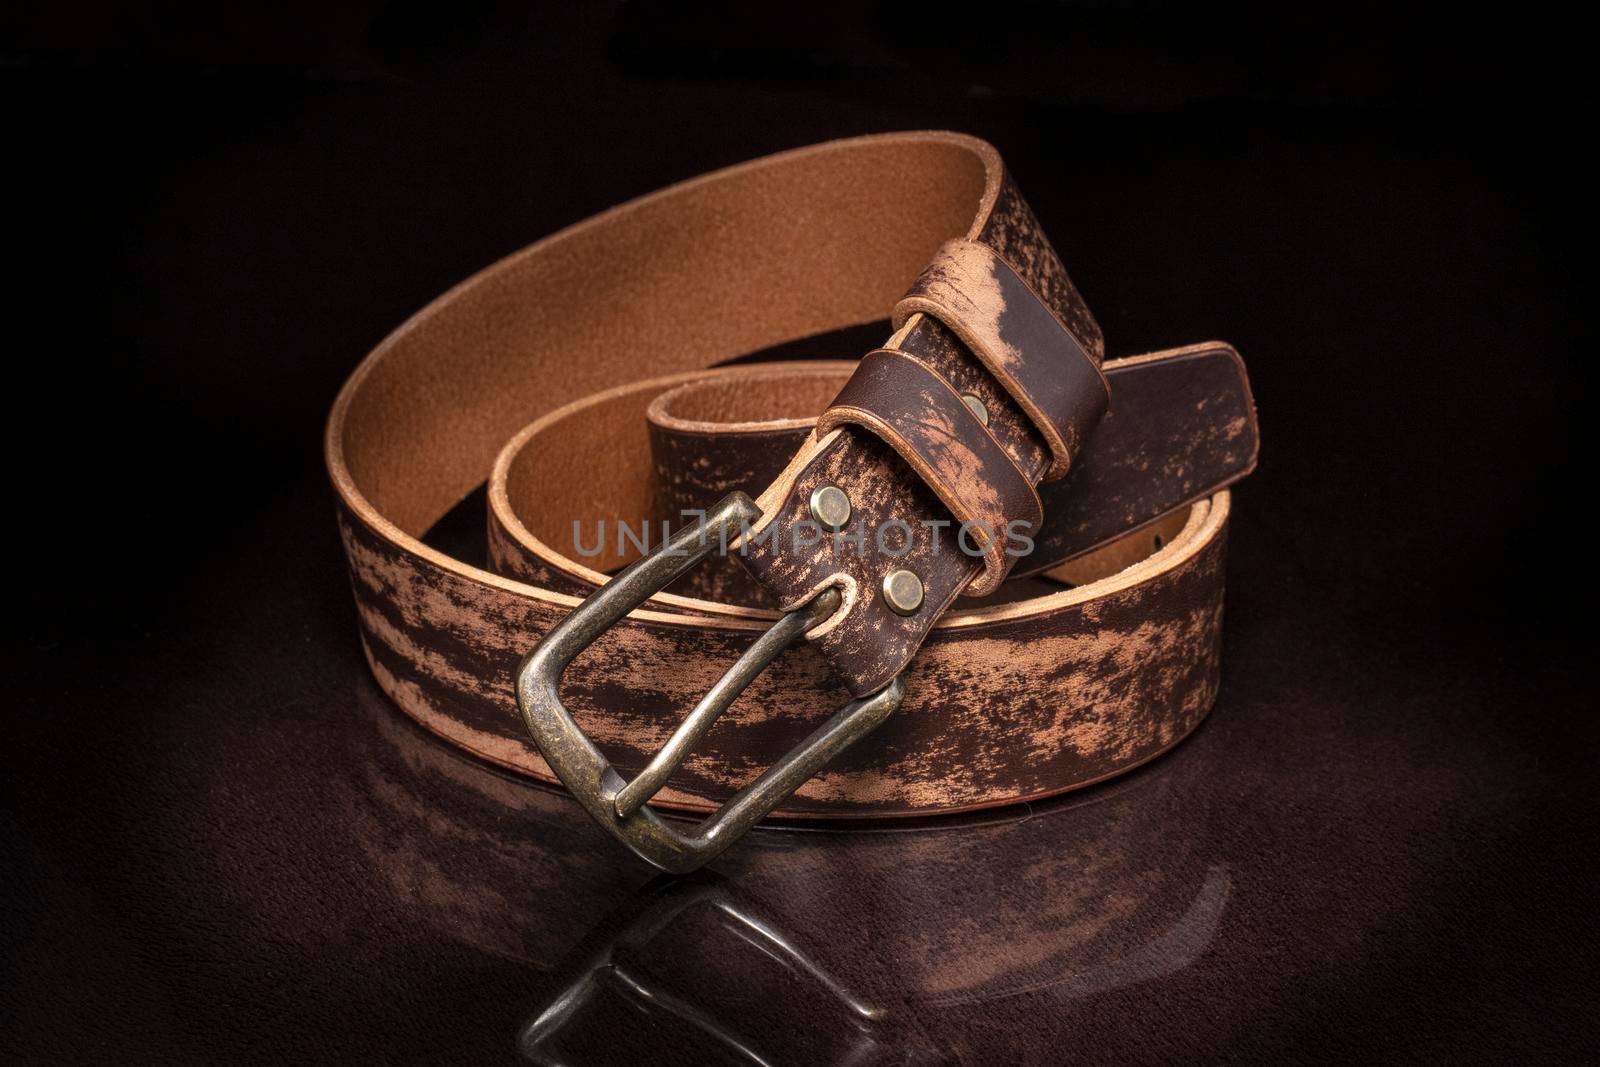 Brown leather belt with scuffs and a metal buckle on a dark background.